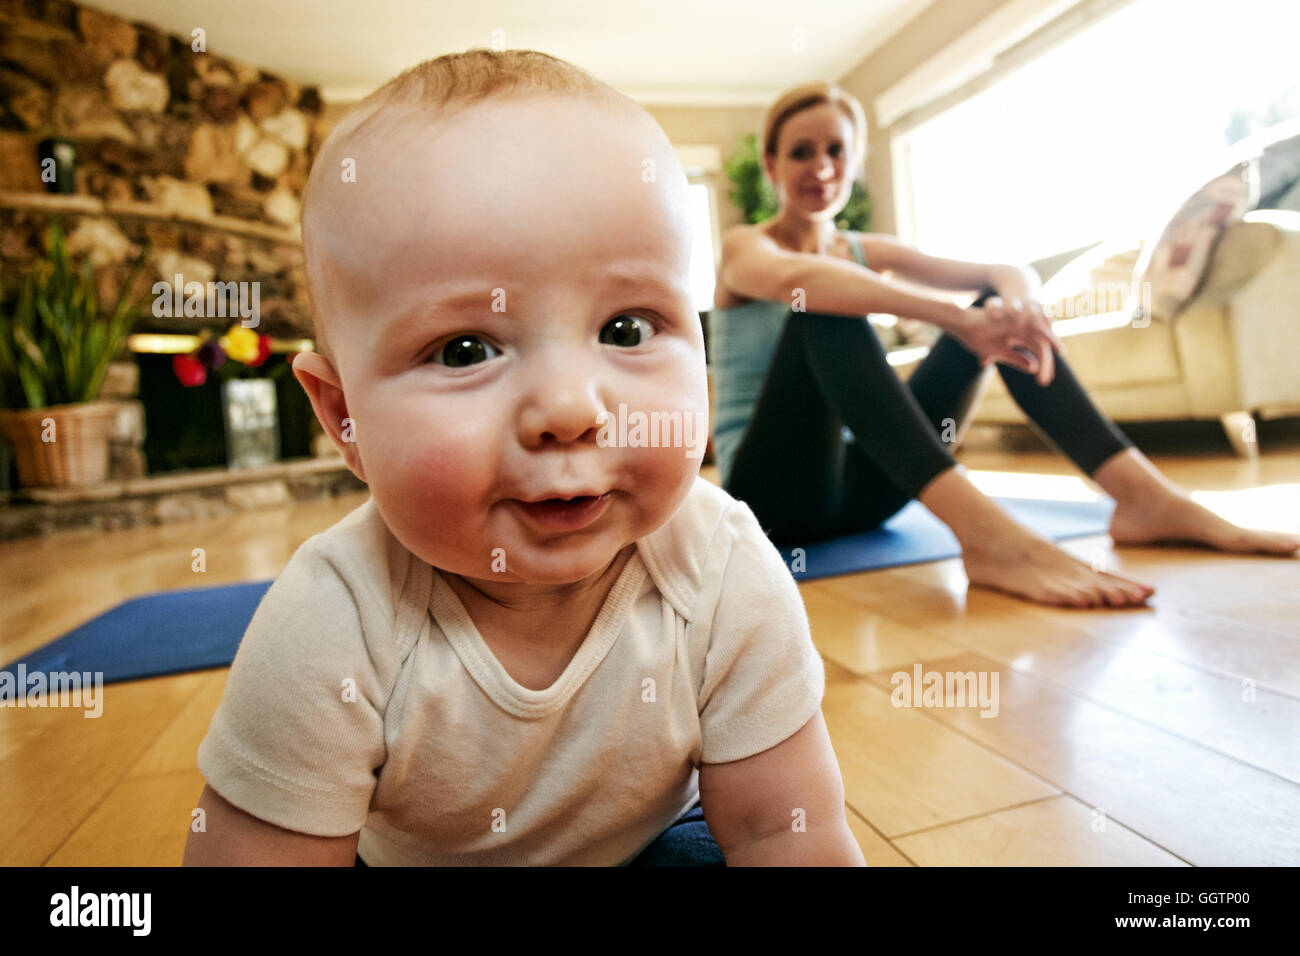 Baby crawling on floor while mother rests from workout Stock Photo